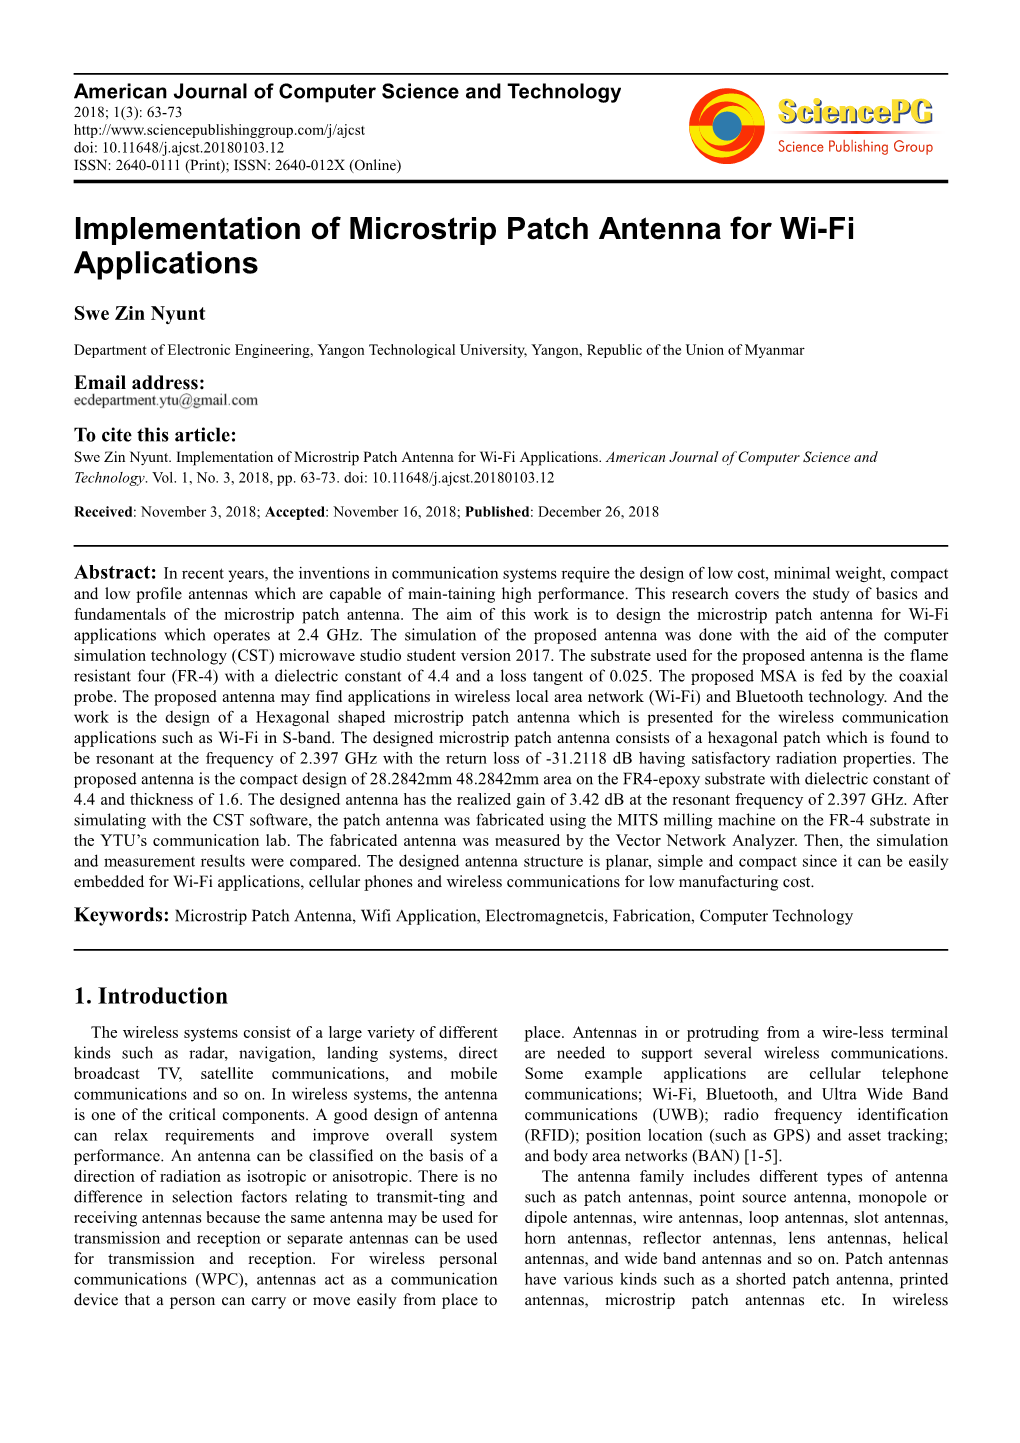 Implementation of Microstrip Patch Antenna for Wi-Fi Applications